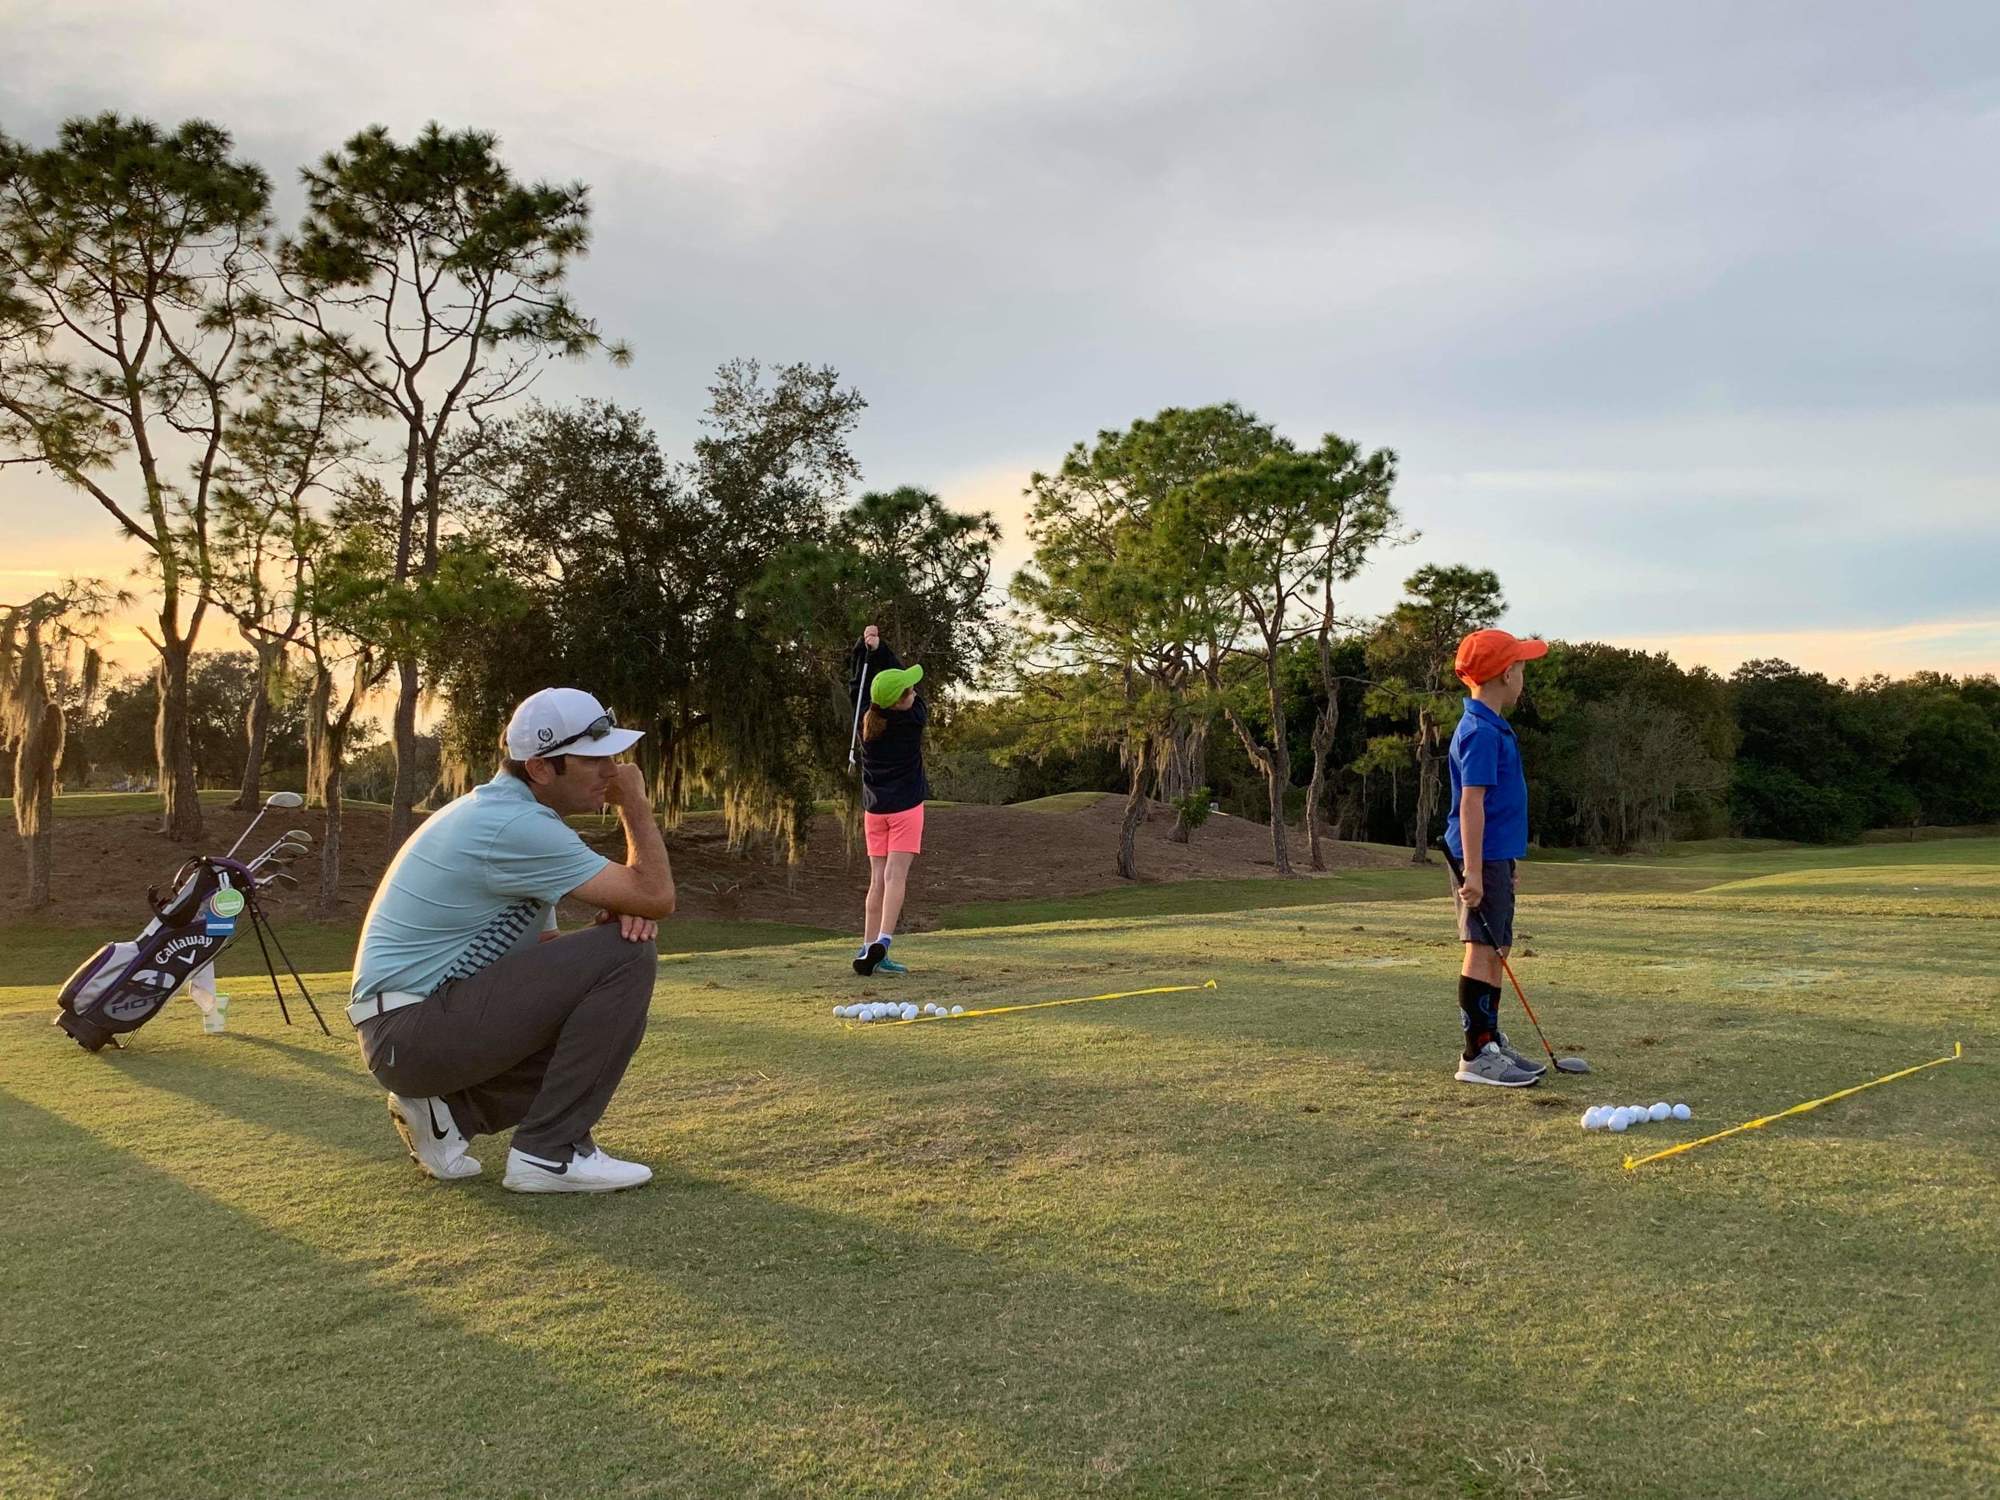 Jon Bullas works with two young golfers at Laurel Oak Country Club. Photo courtesy Jon Bullas.